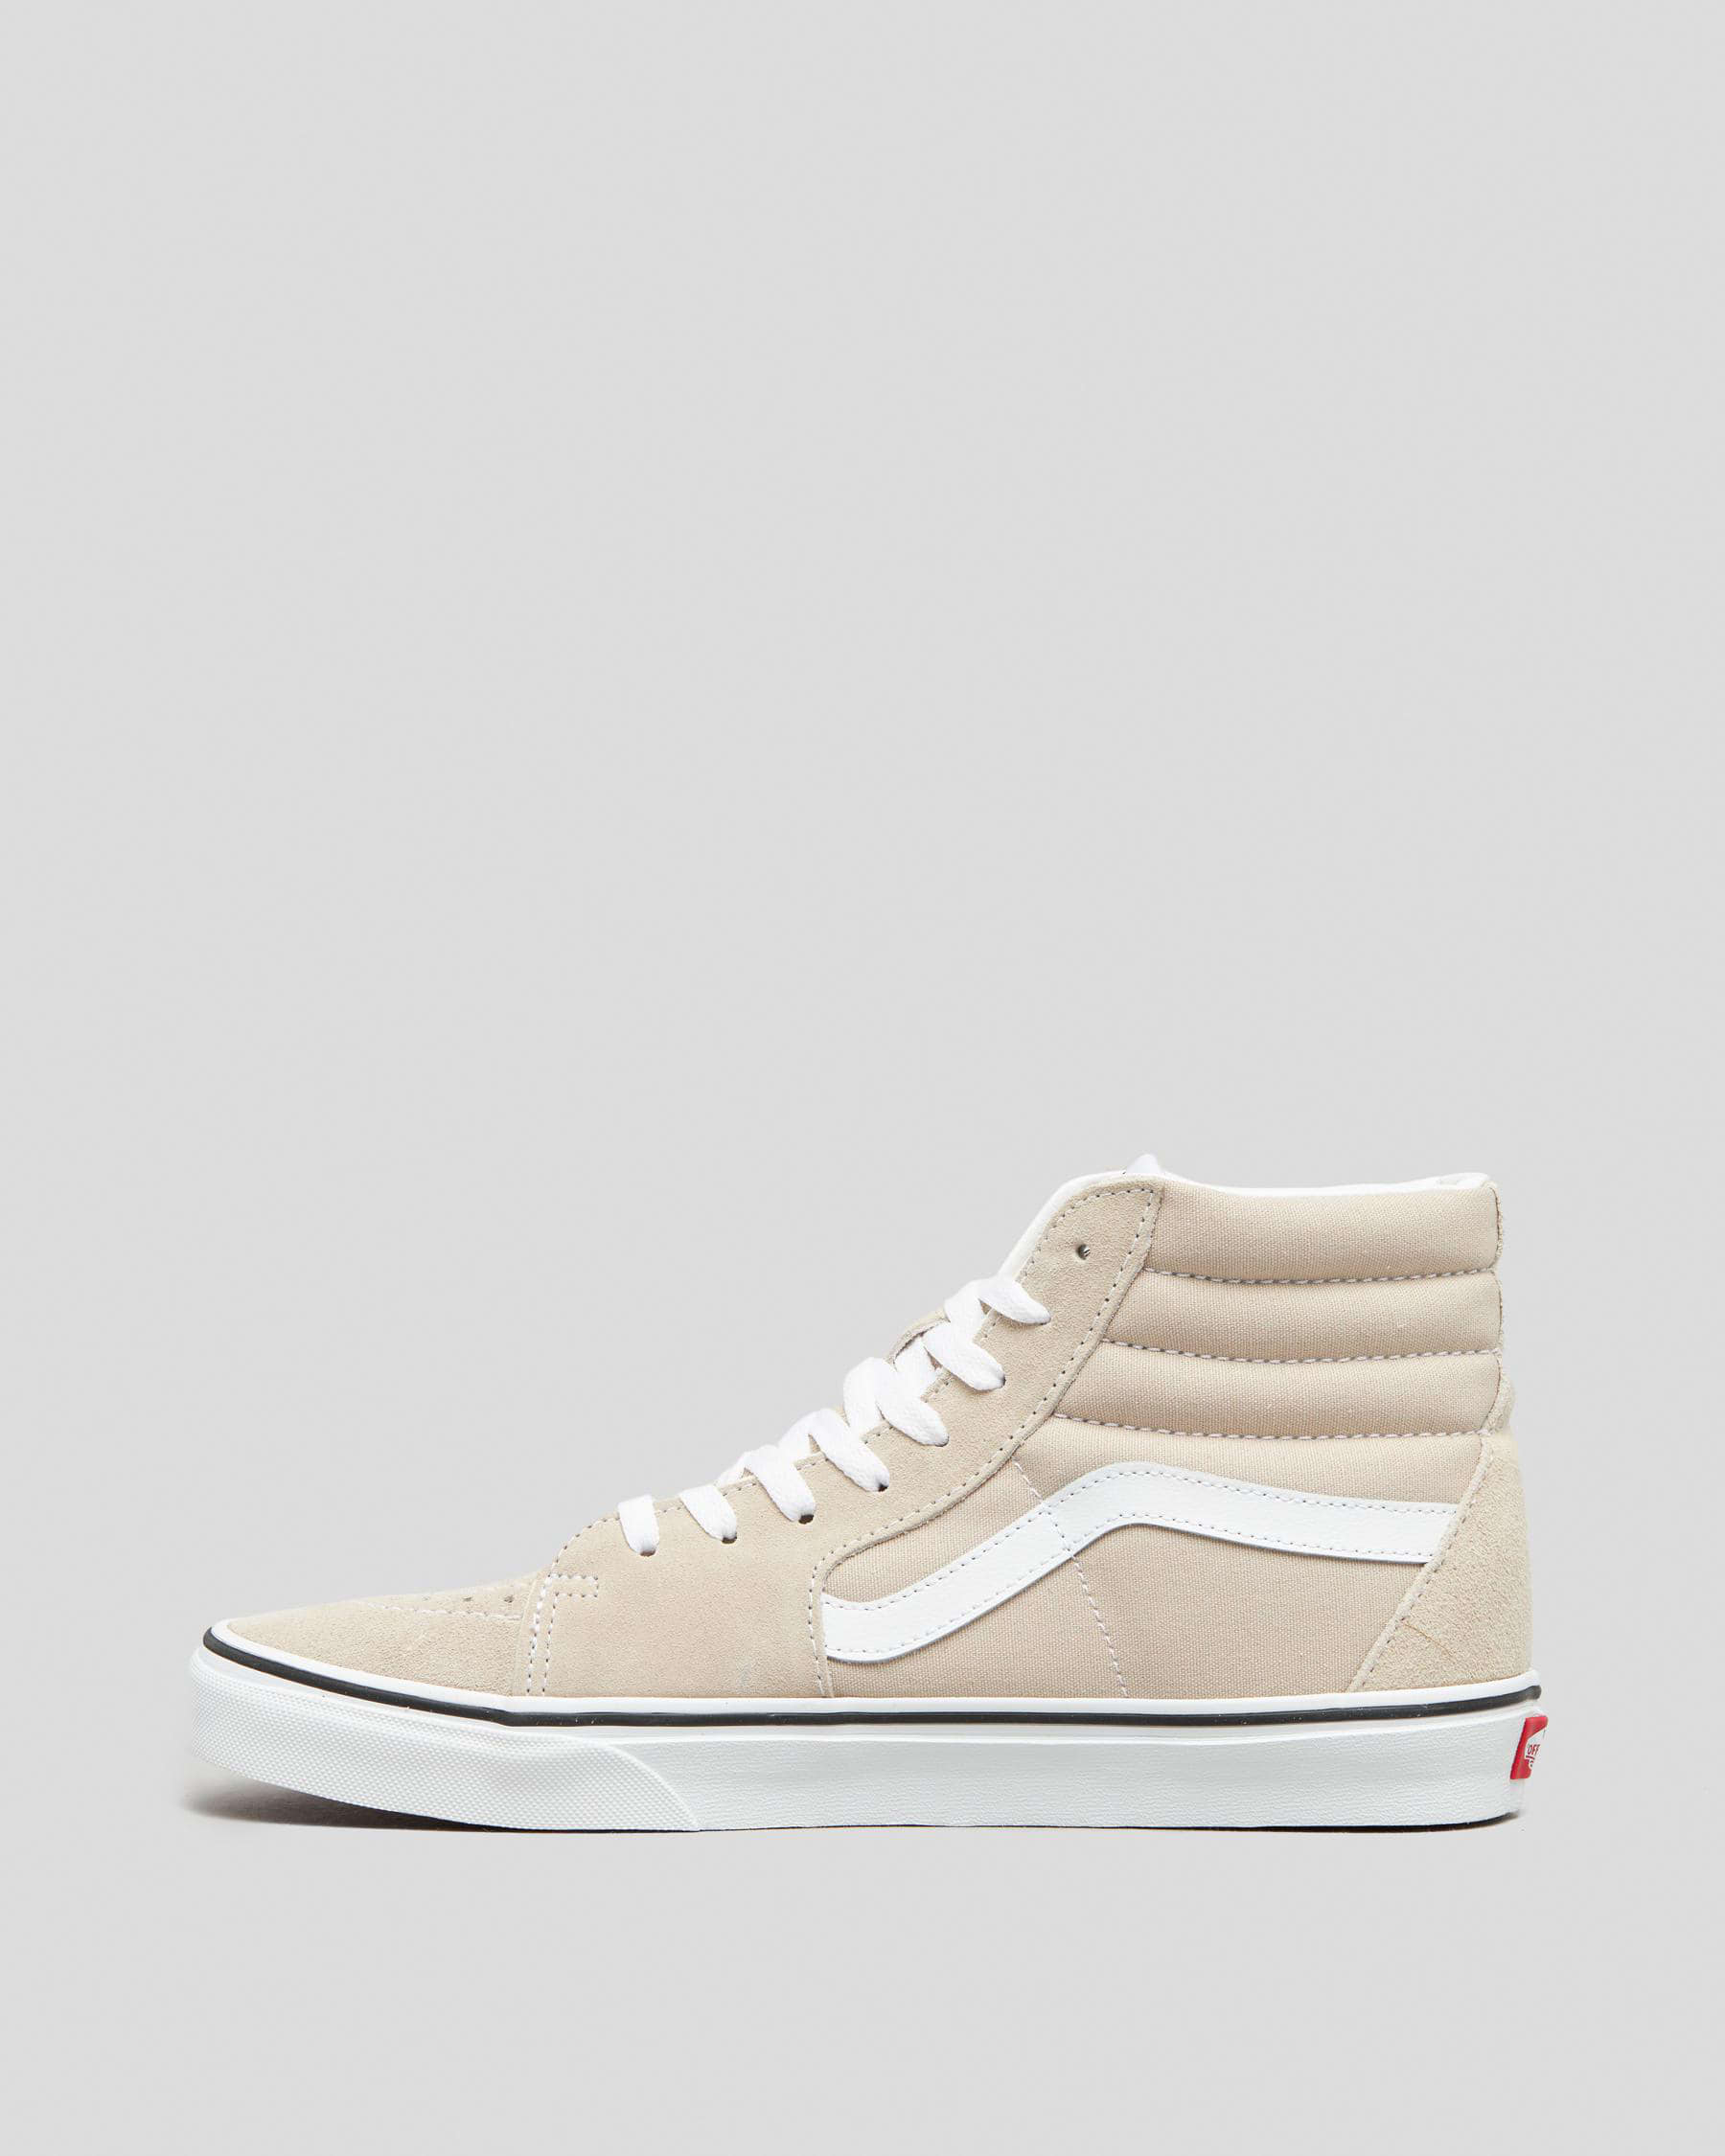 Shop Vans Sk8-Hi Shoes In Colour Theory French Oak - Fast Shipping ...